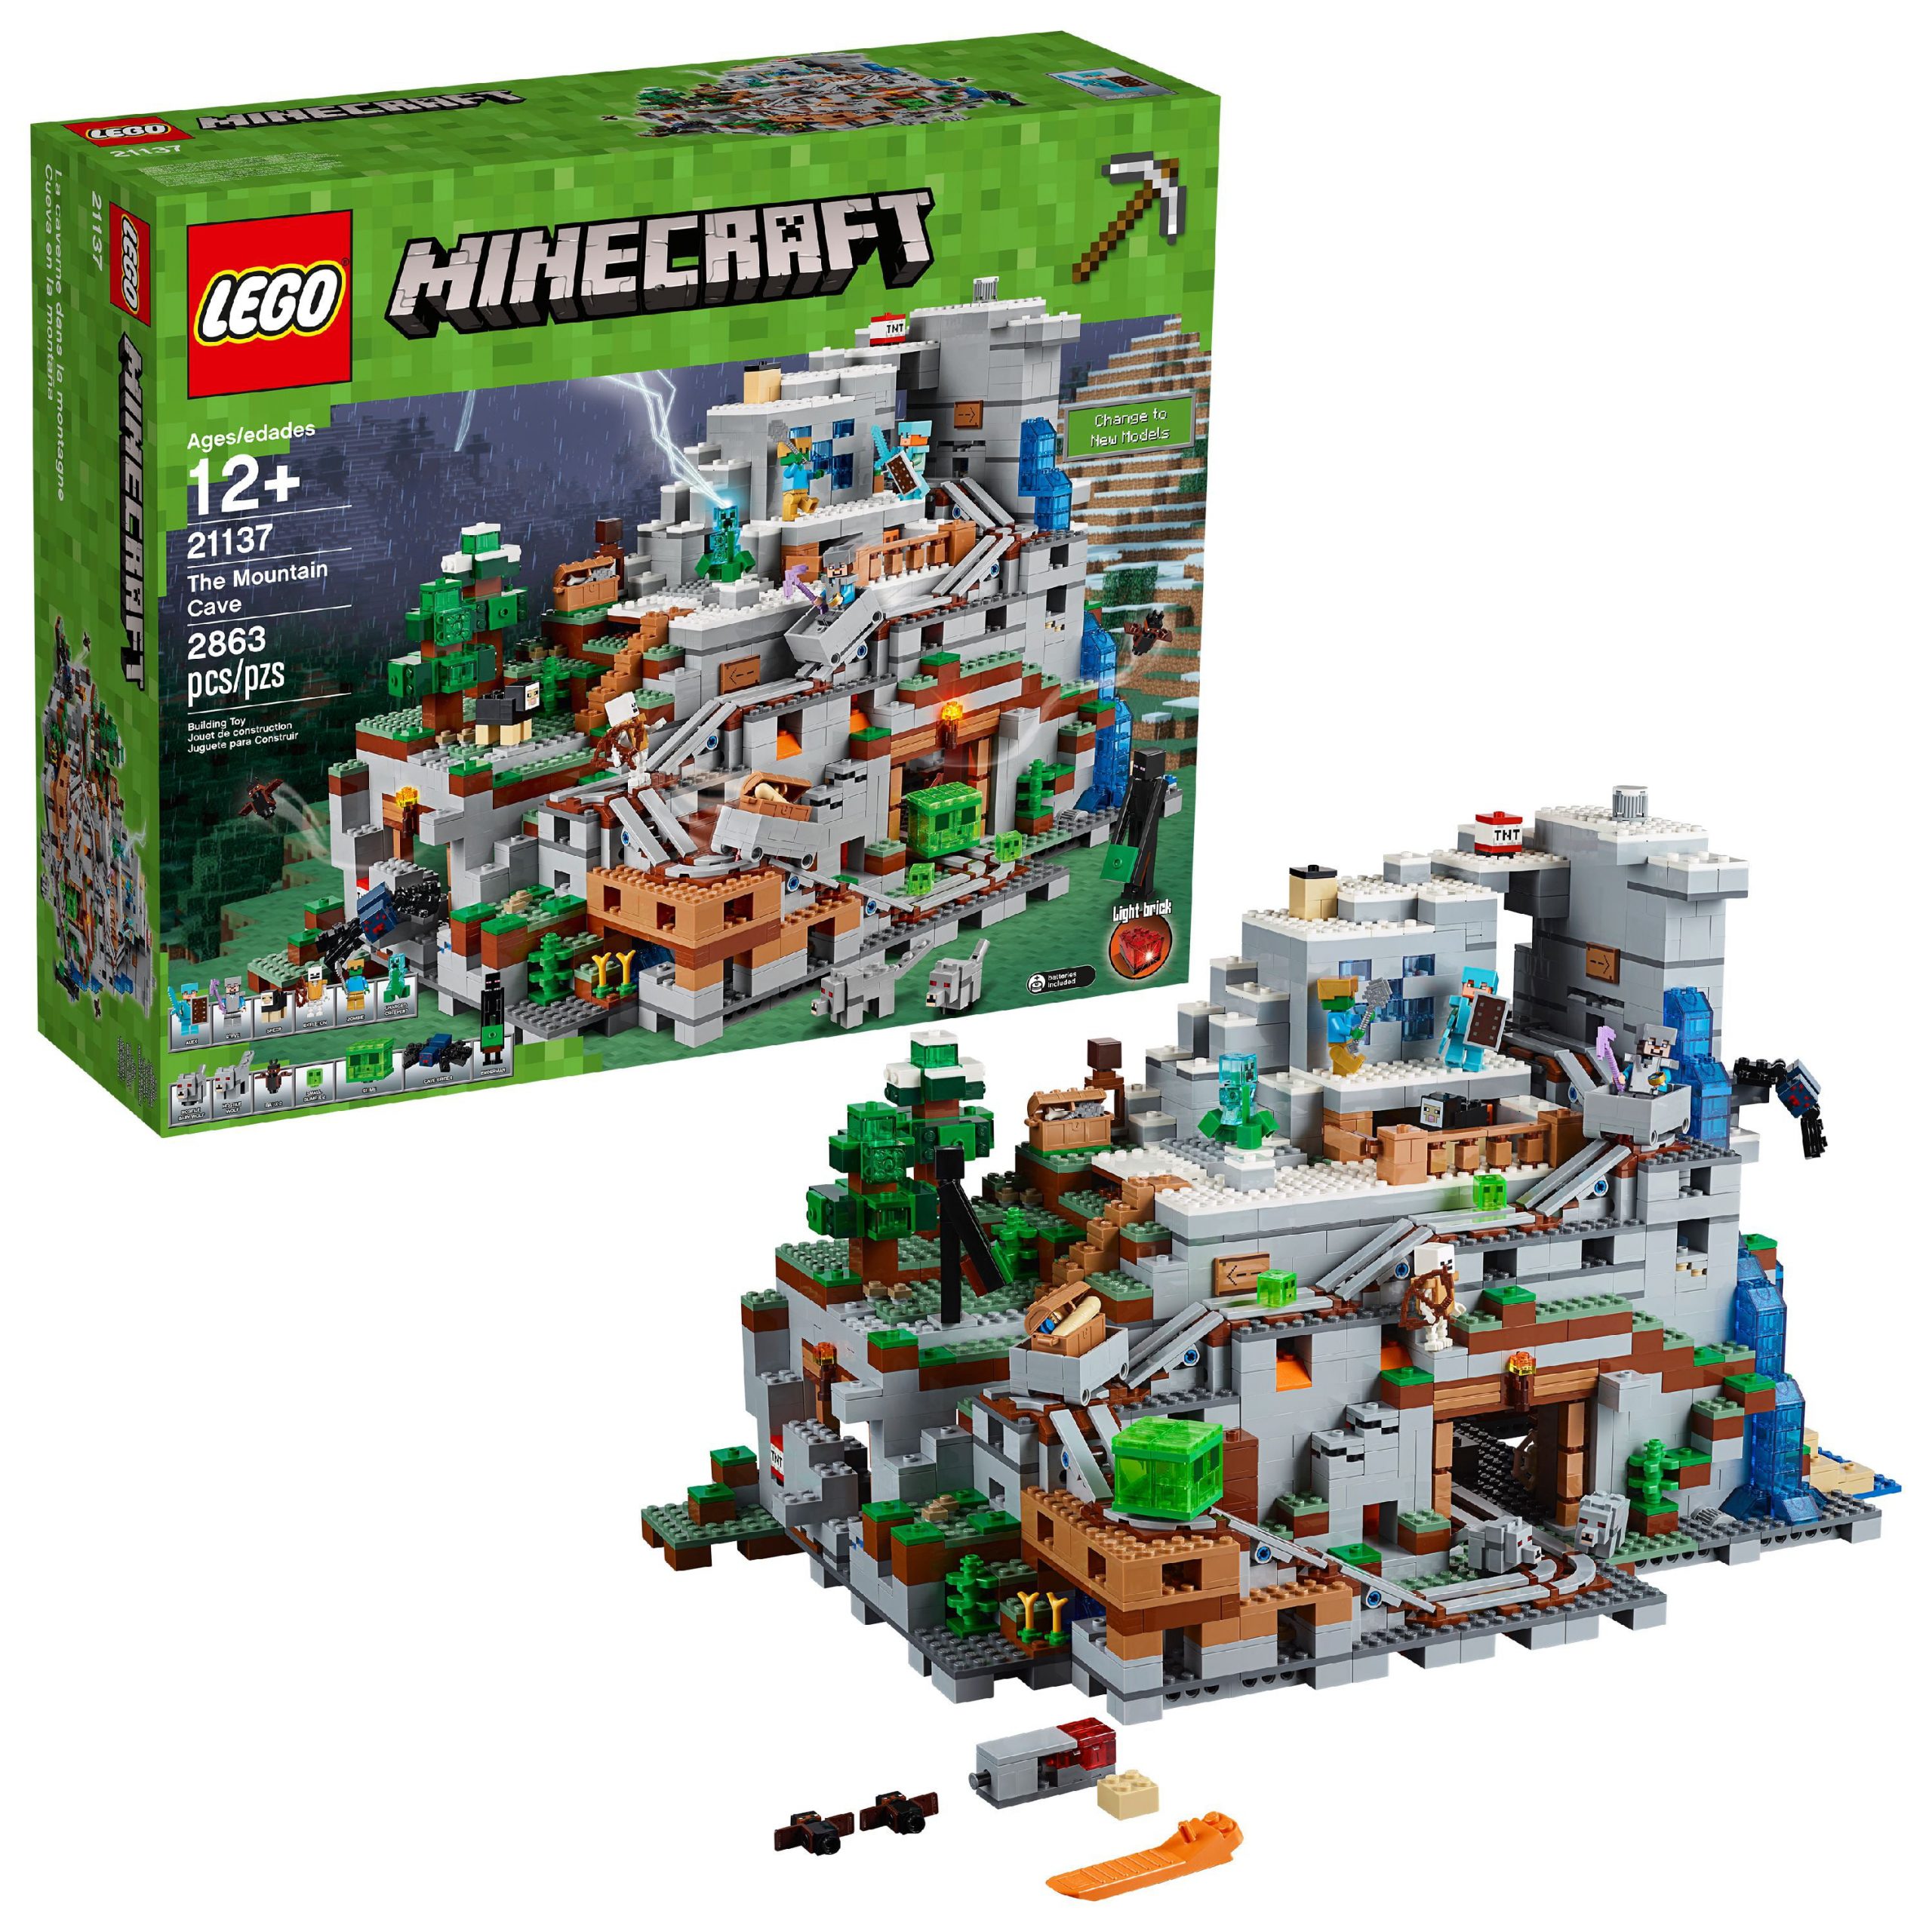 LEGO Minecraft The Mountain Cave 21137 (2,863 Pieces)